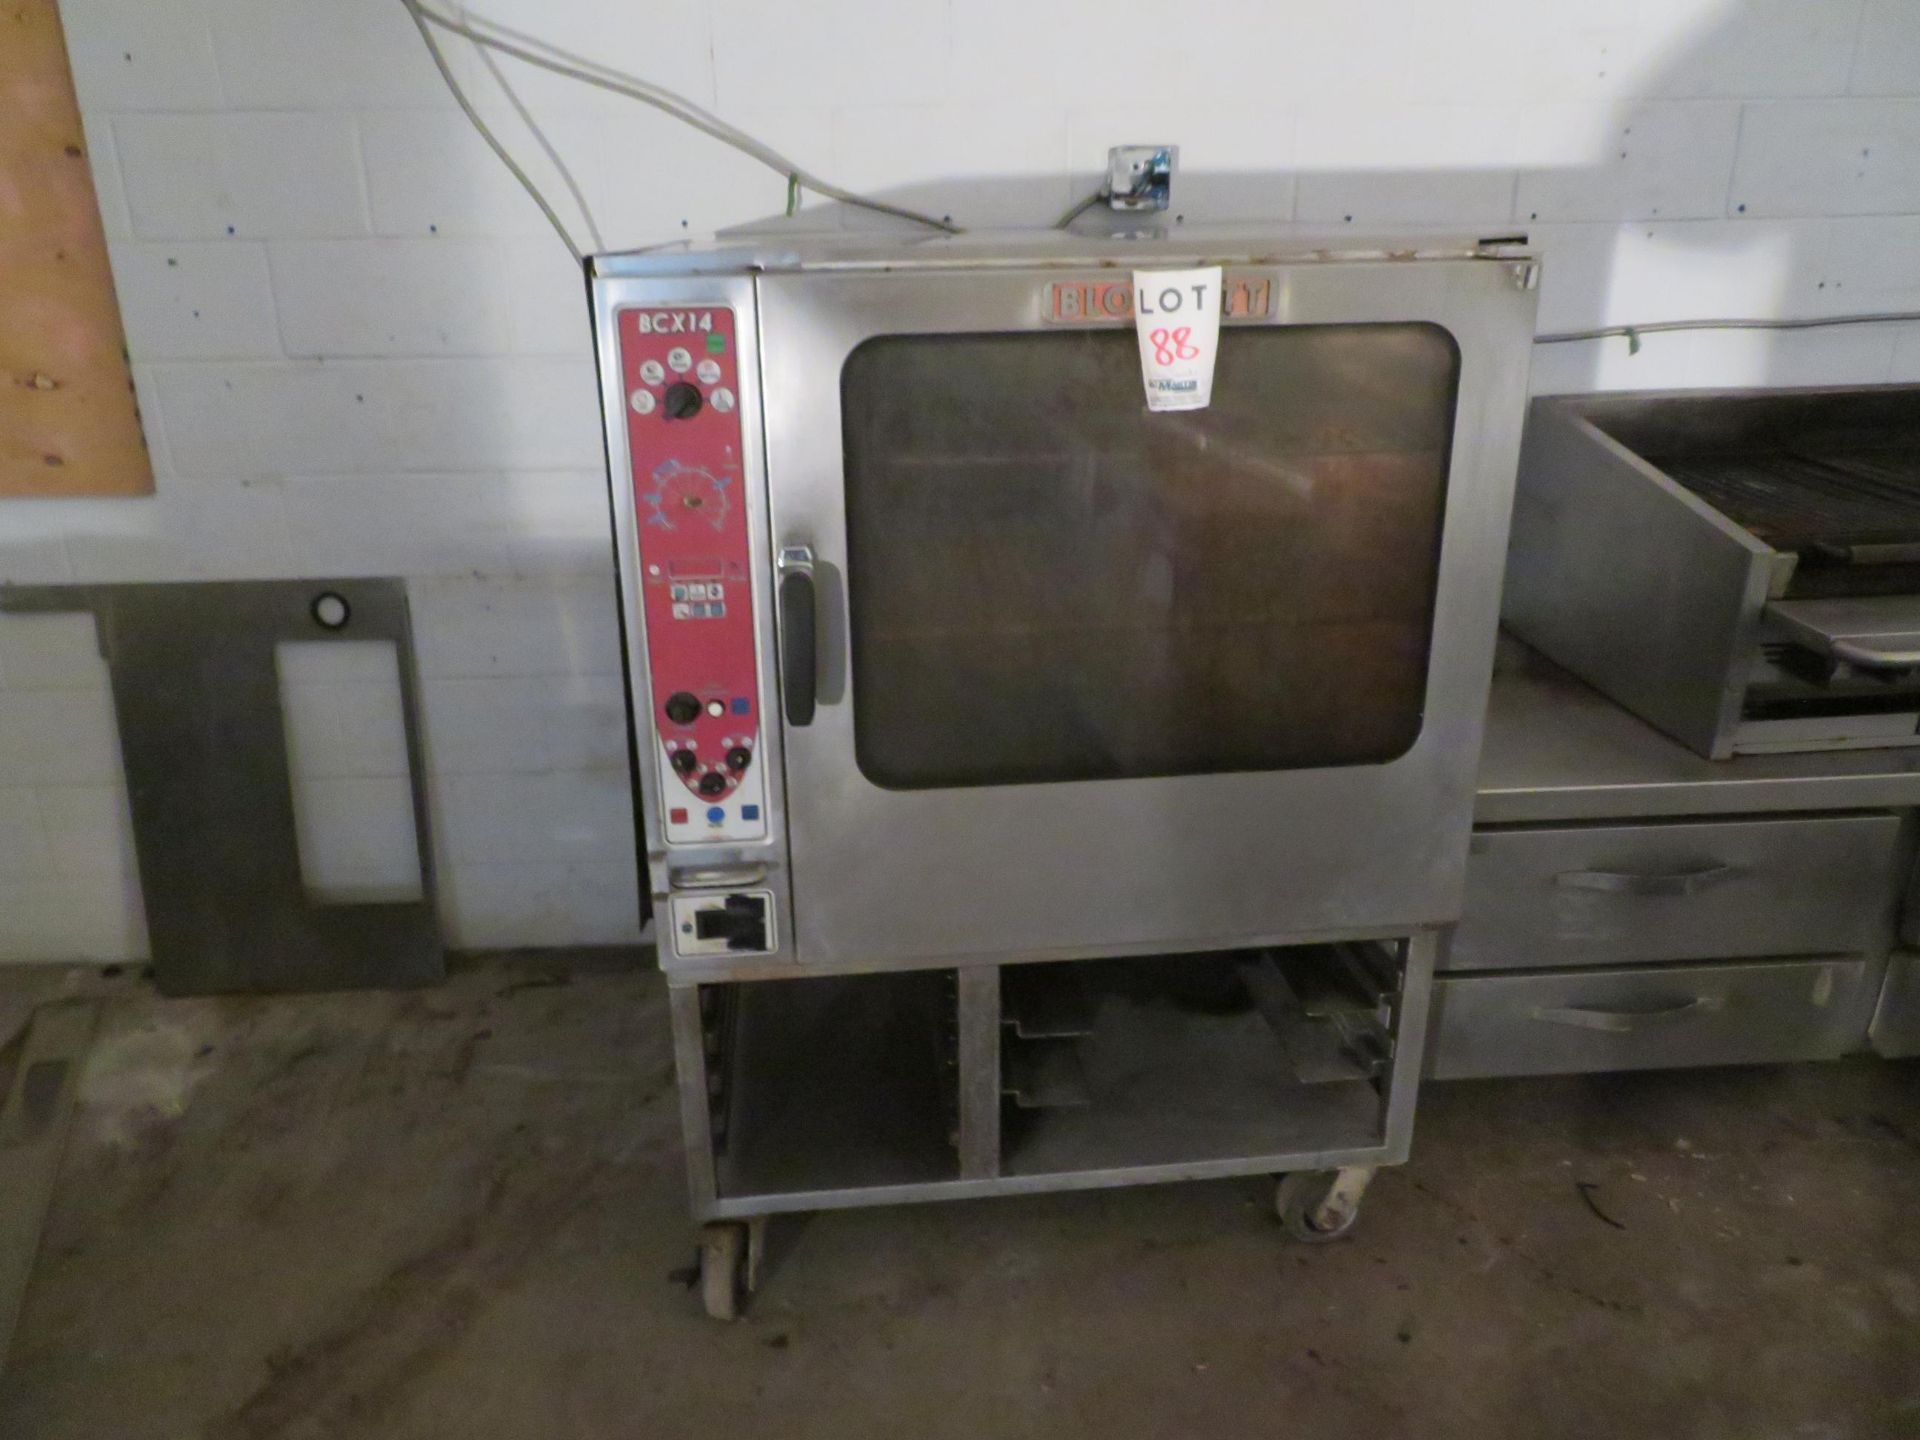 BLODGETT commercial oven with rack on wheels, Mod #BCX14 approx. 40"w x 37"d x 56"h